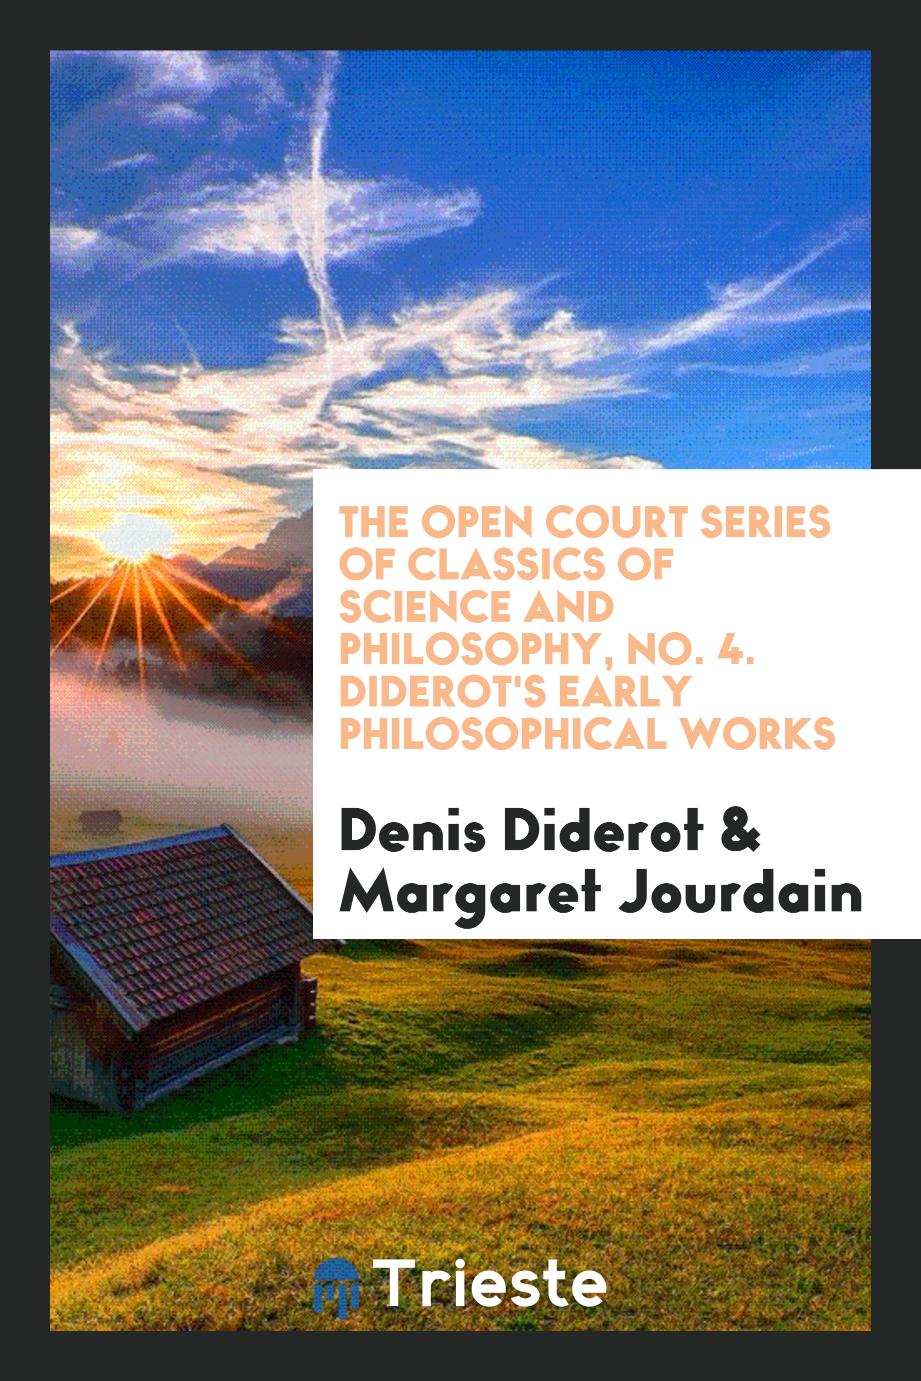 The Open Court Series of Classics of Science and Philosophy, No. 4. Diderot's Early Philosophical Works